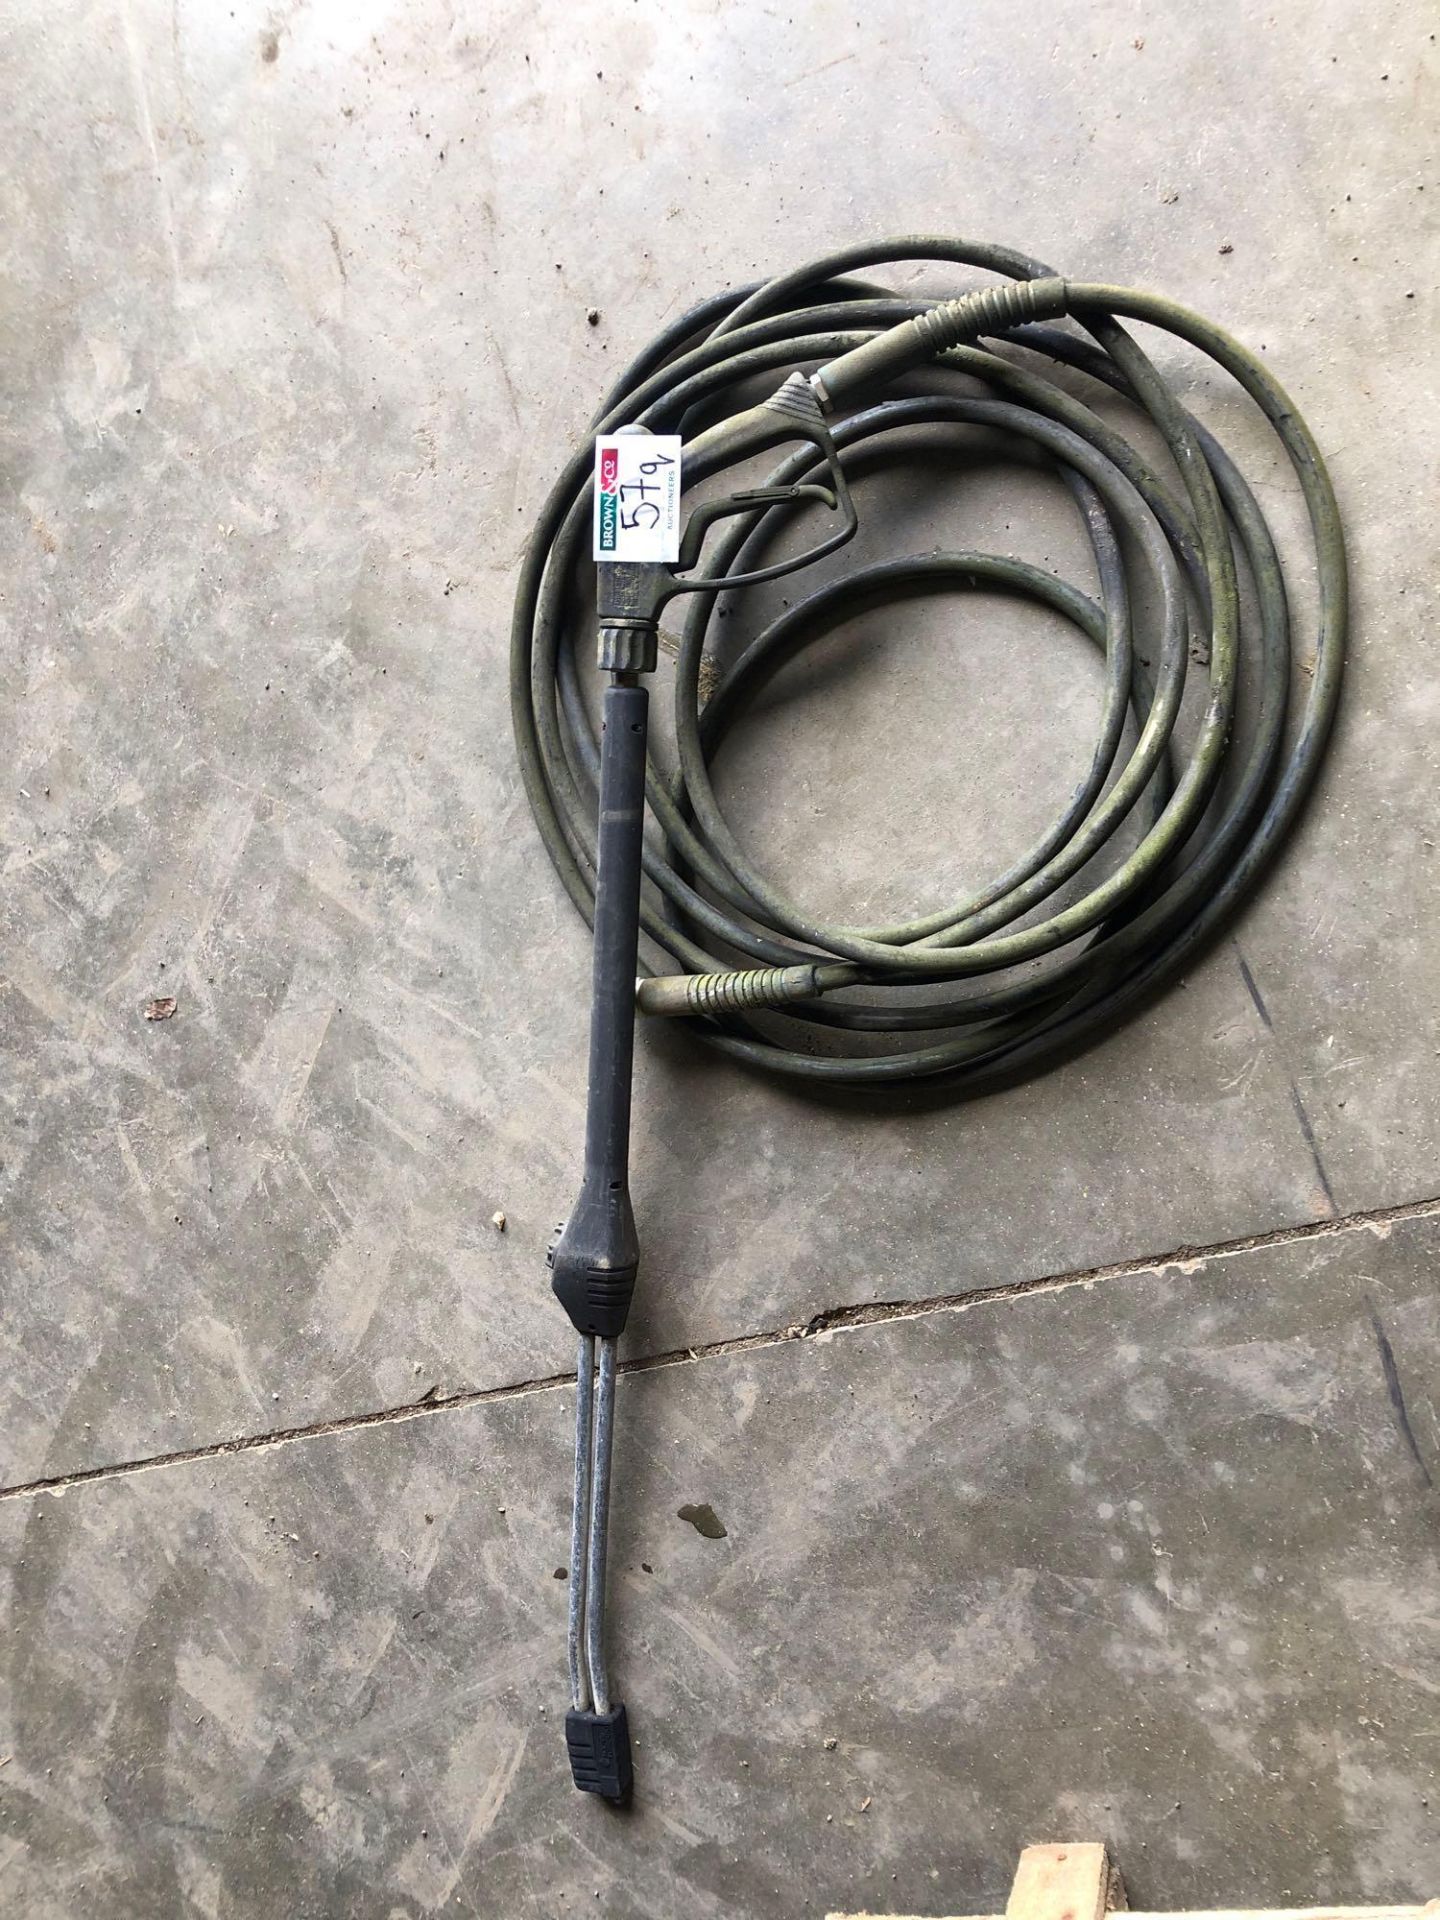 Pressure washer lance and hose